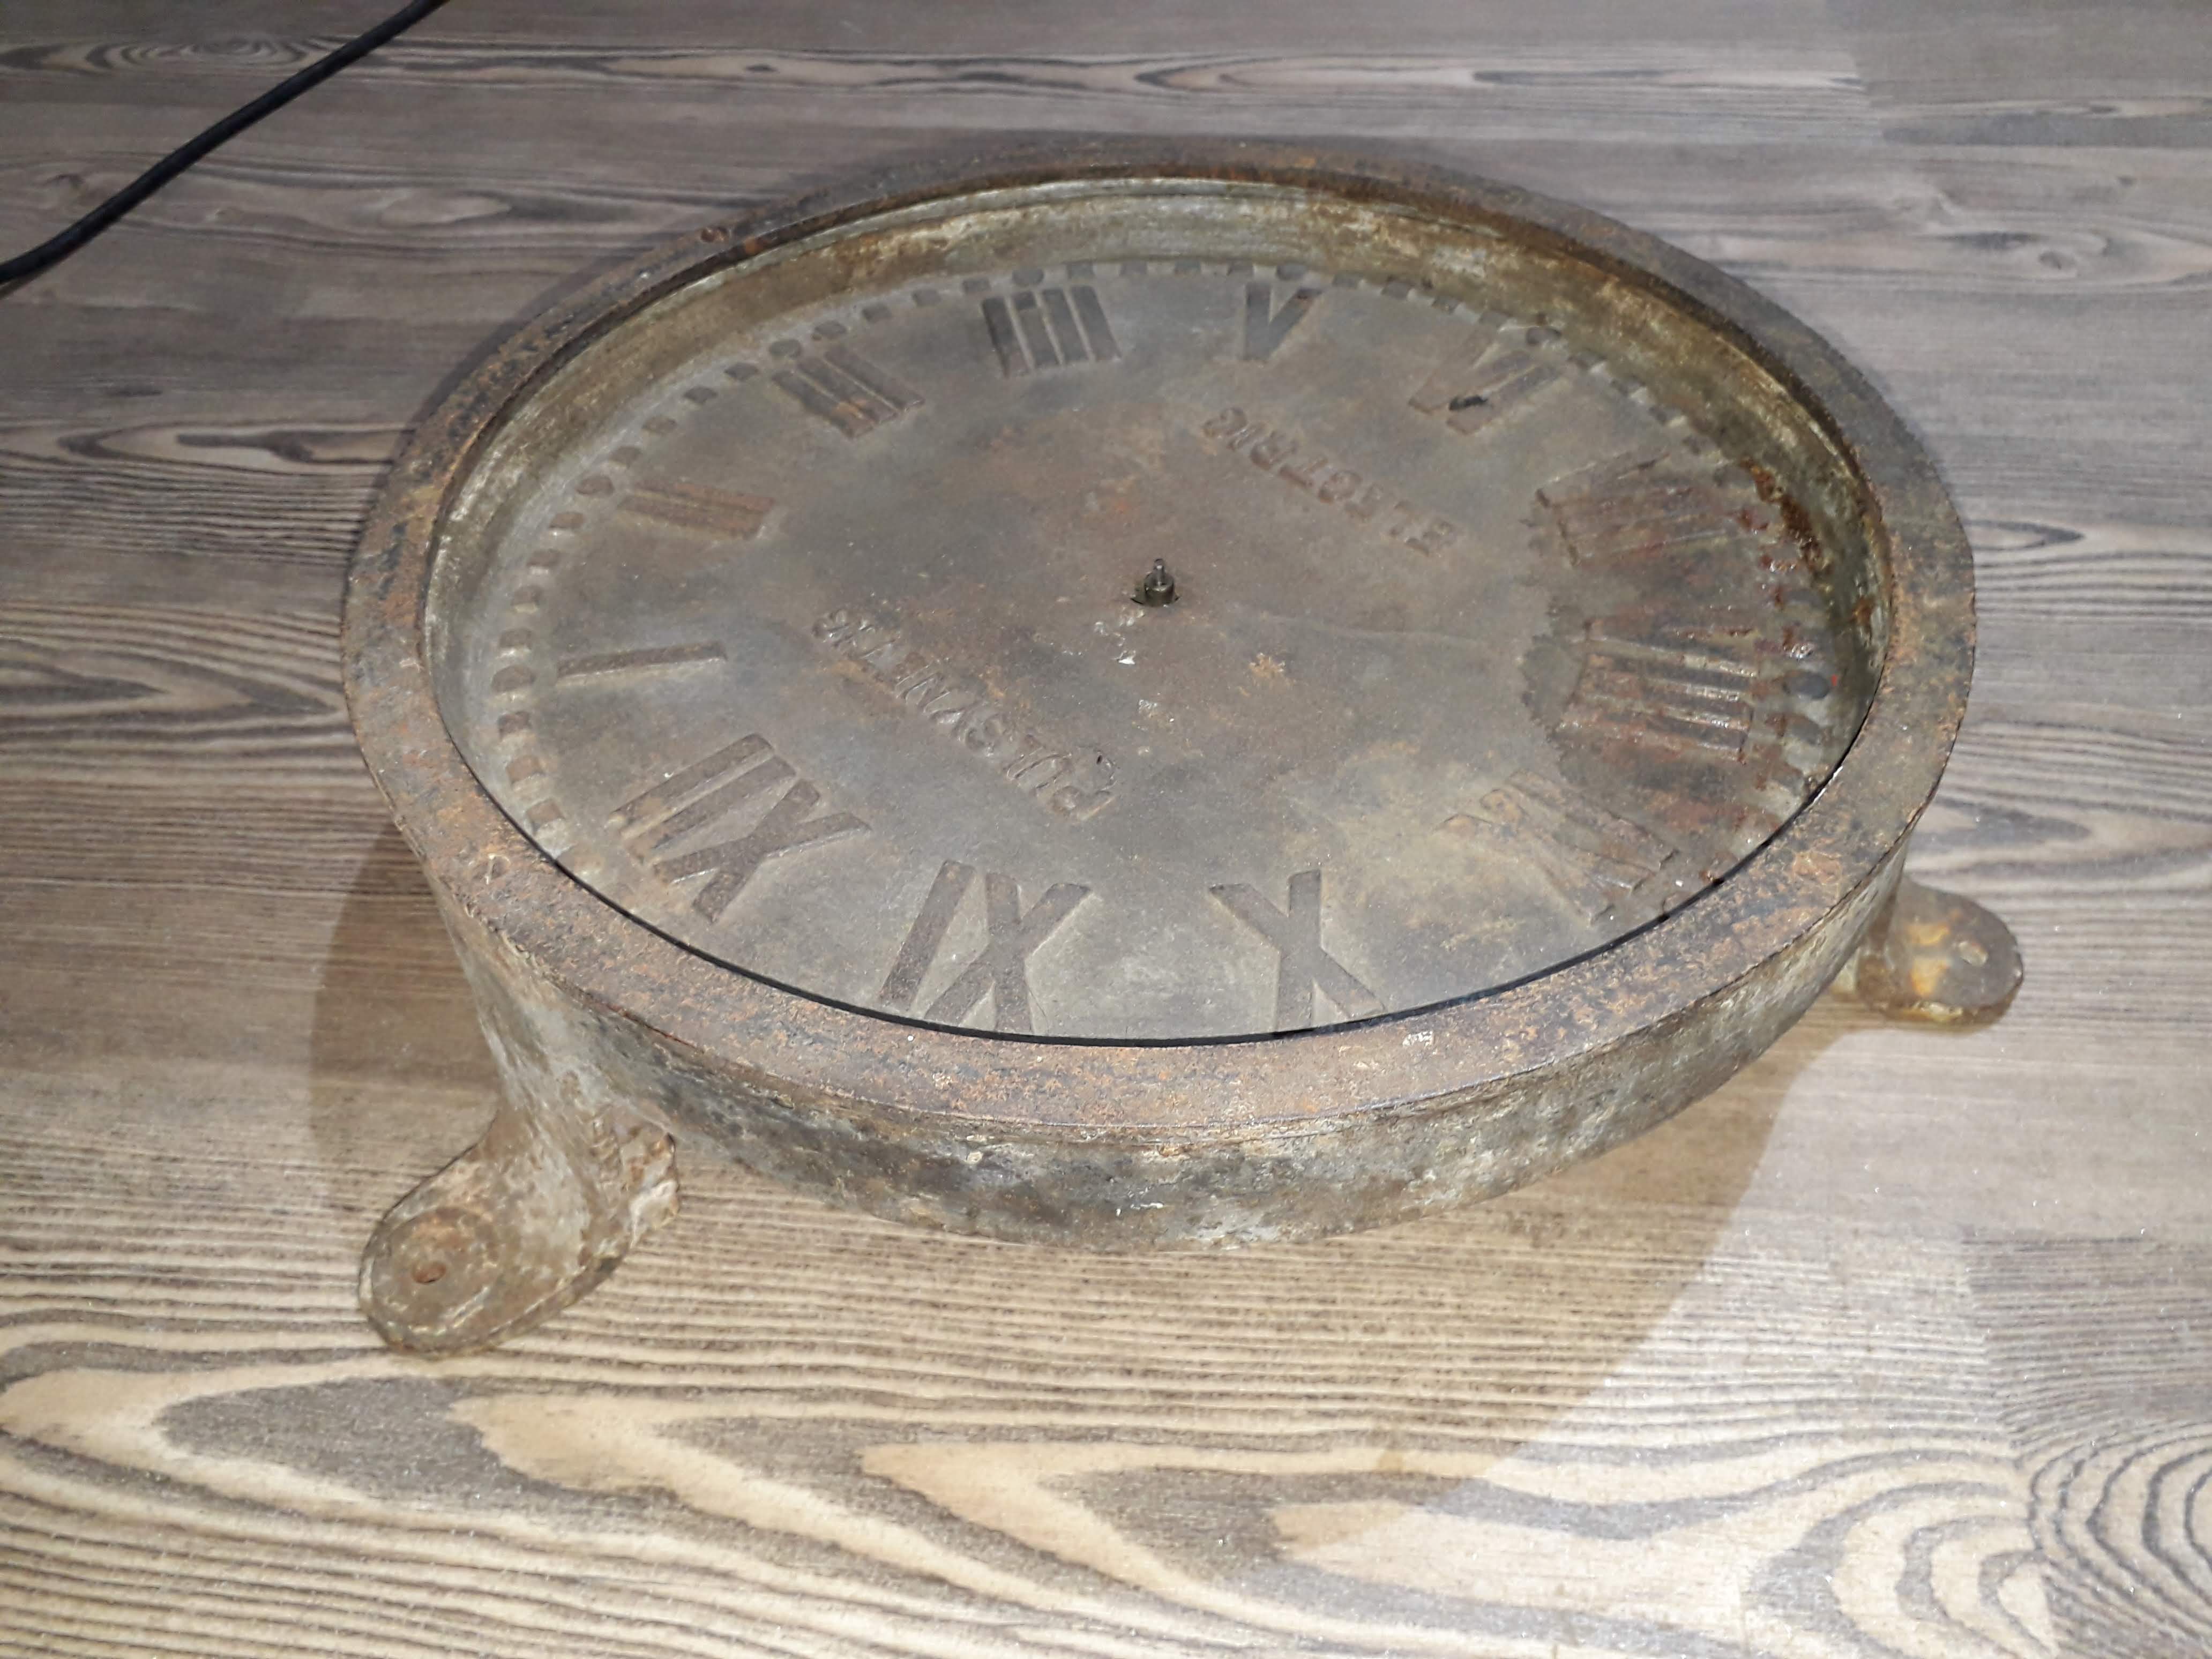 A cast iron station clock PULSYNETIC ELECTRIC diam. 33cm, as found. - Image 4 of 6